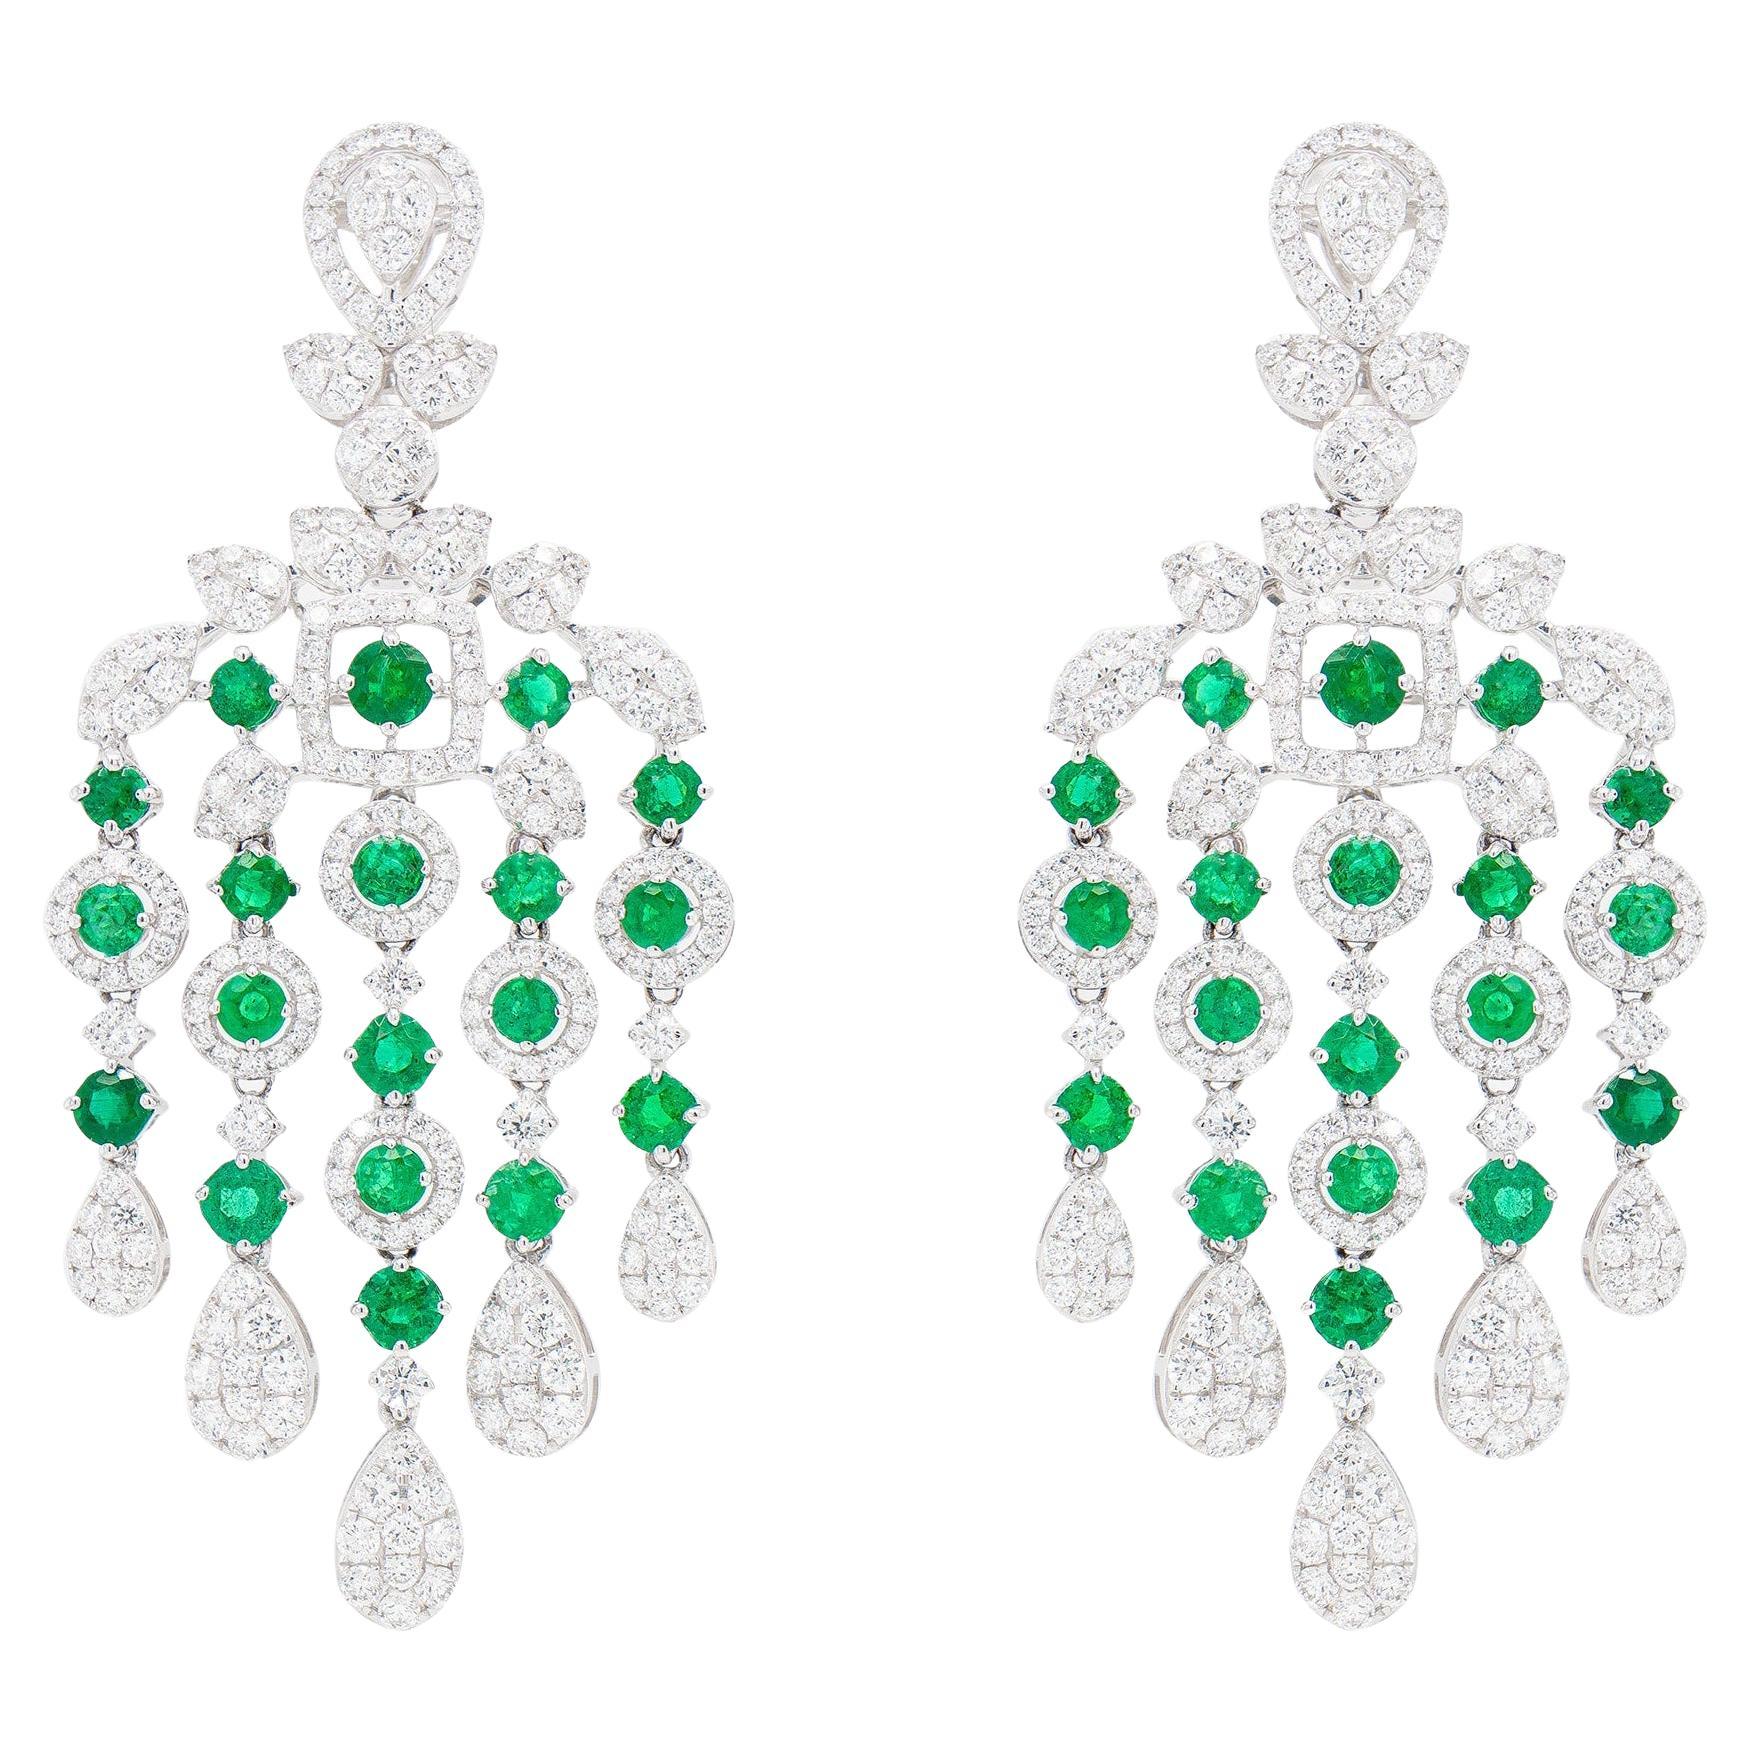 Chandelier Earrings Emeralds 3.46 Carats and Diamonds 3.87 Carats For Sale